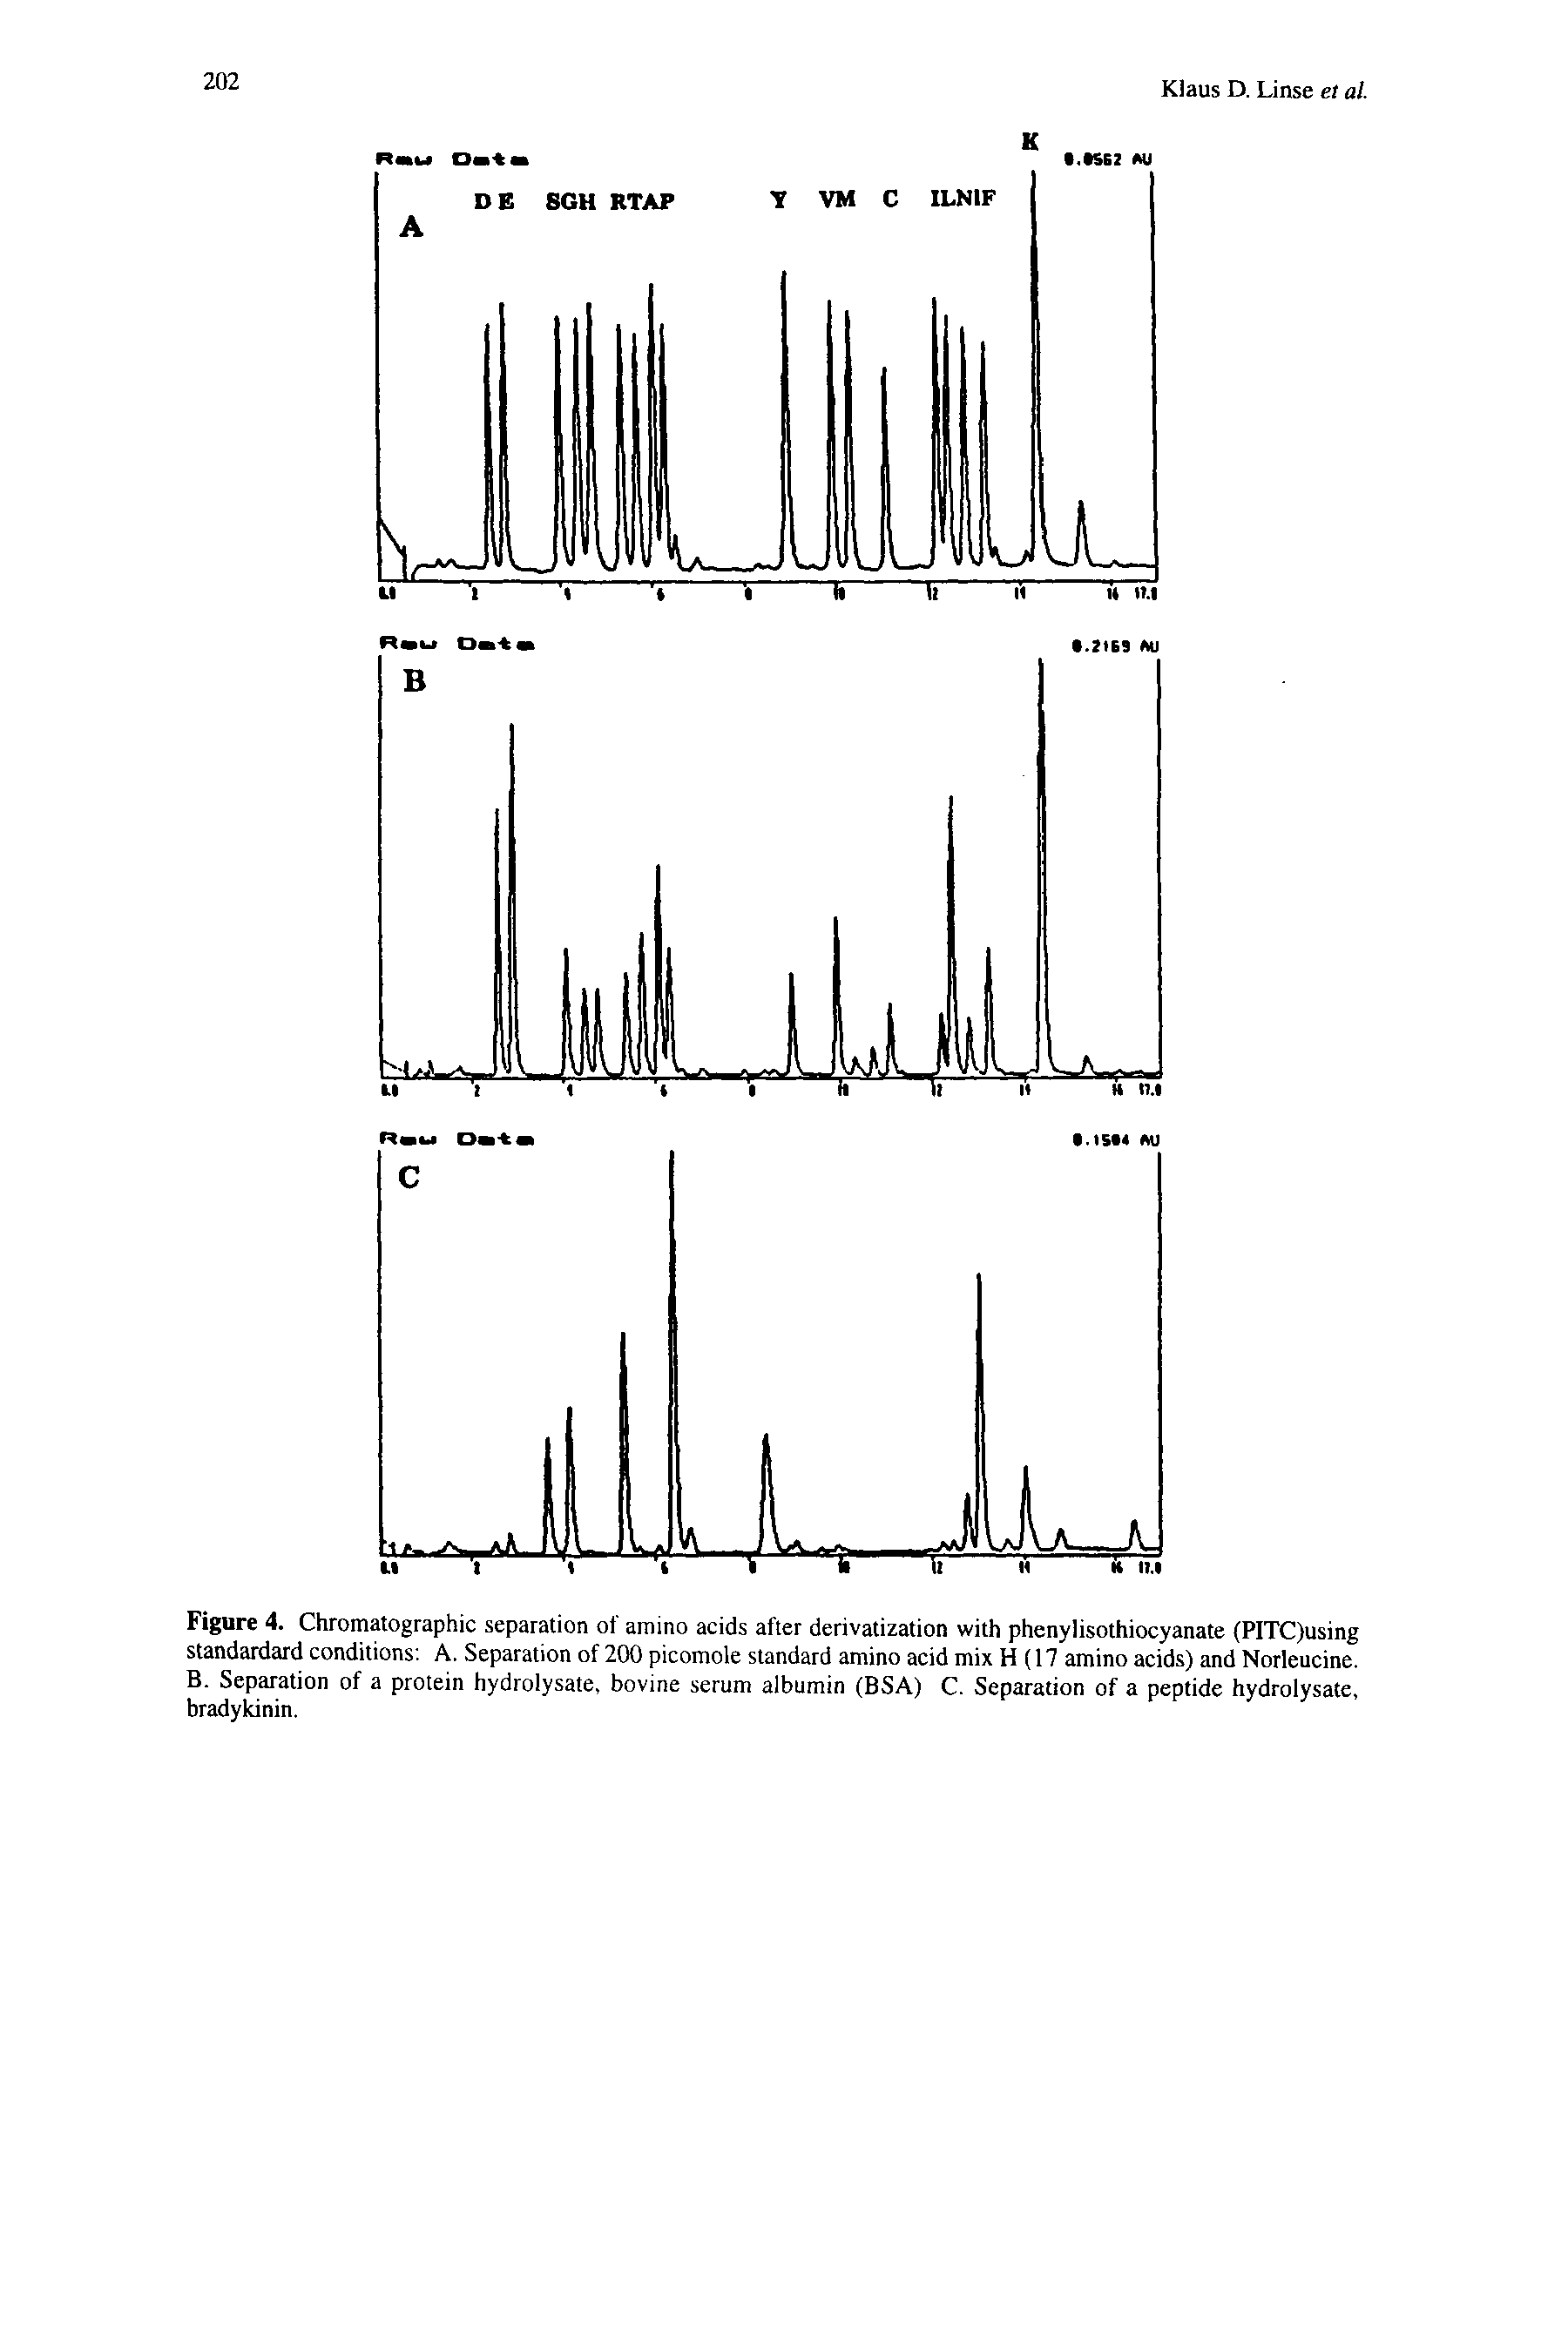 Figure 4. Chromatographic separation of amino acids after derivatization with phenylisothiocyanate (PITC)using standardard conditions A. Separation of 200 picomole standard amino acid mix H (17 amino acids) and Norleucine. B. Separation of a protein hydrolysate, bovine serum albumin (BSA) C. Separation of a peptide hydrolysate bradykinin.